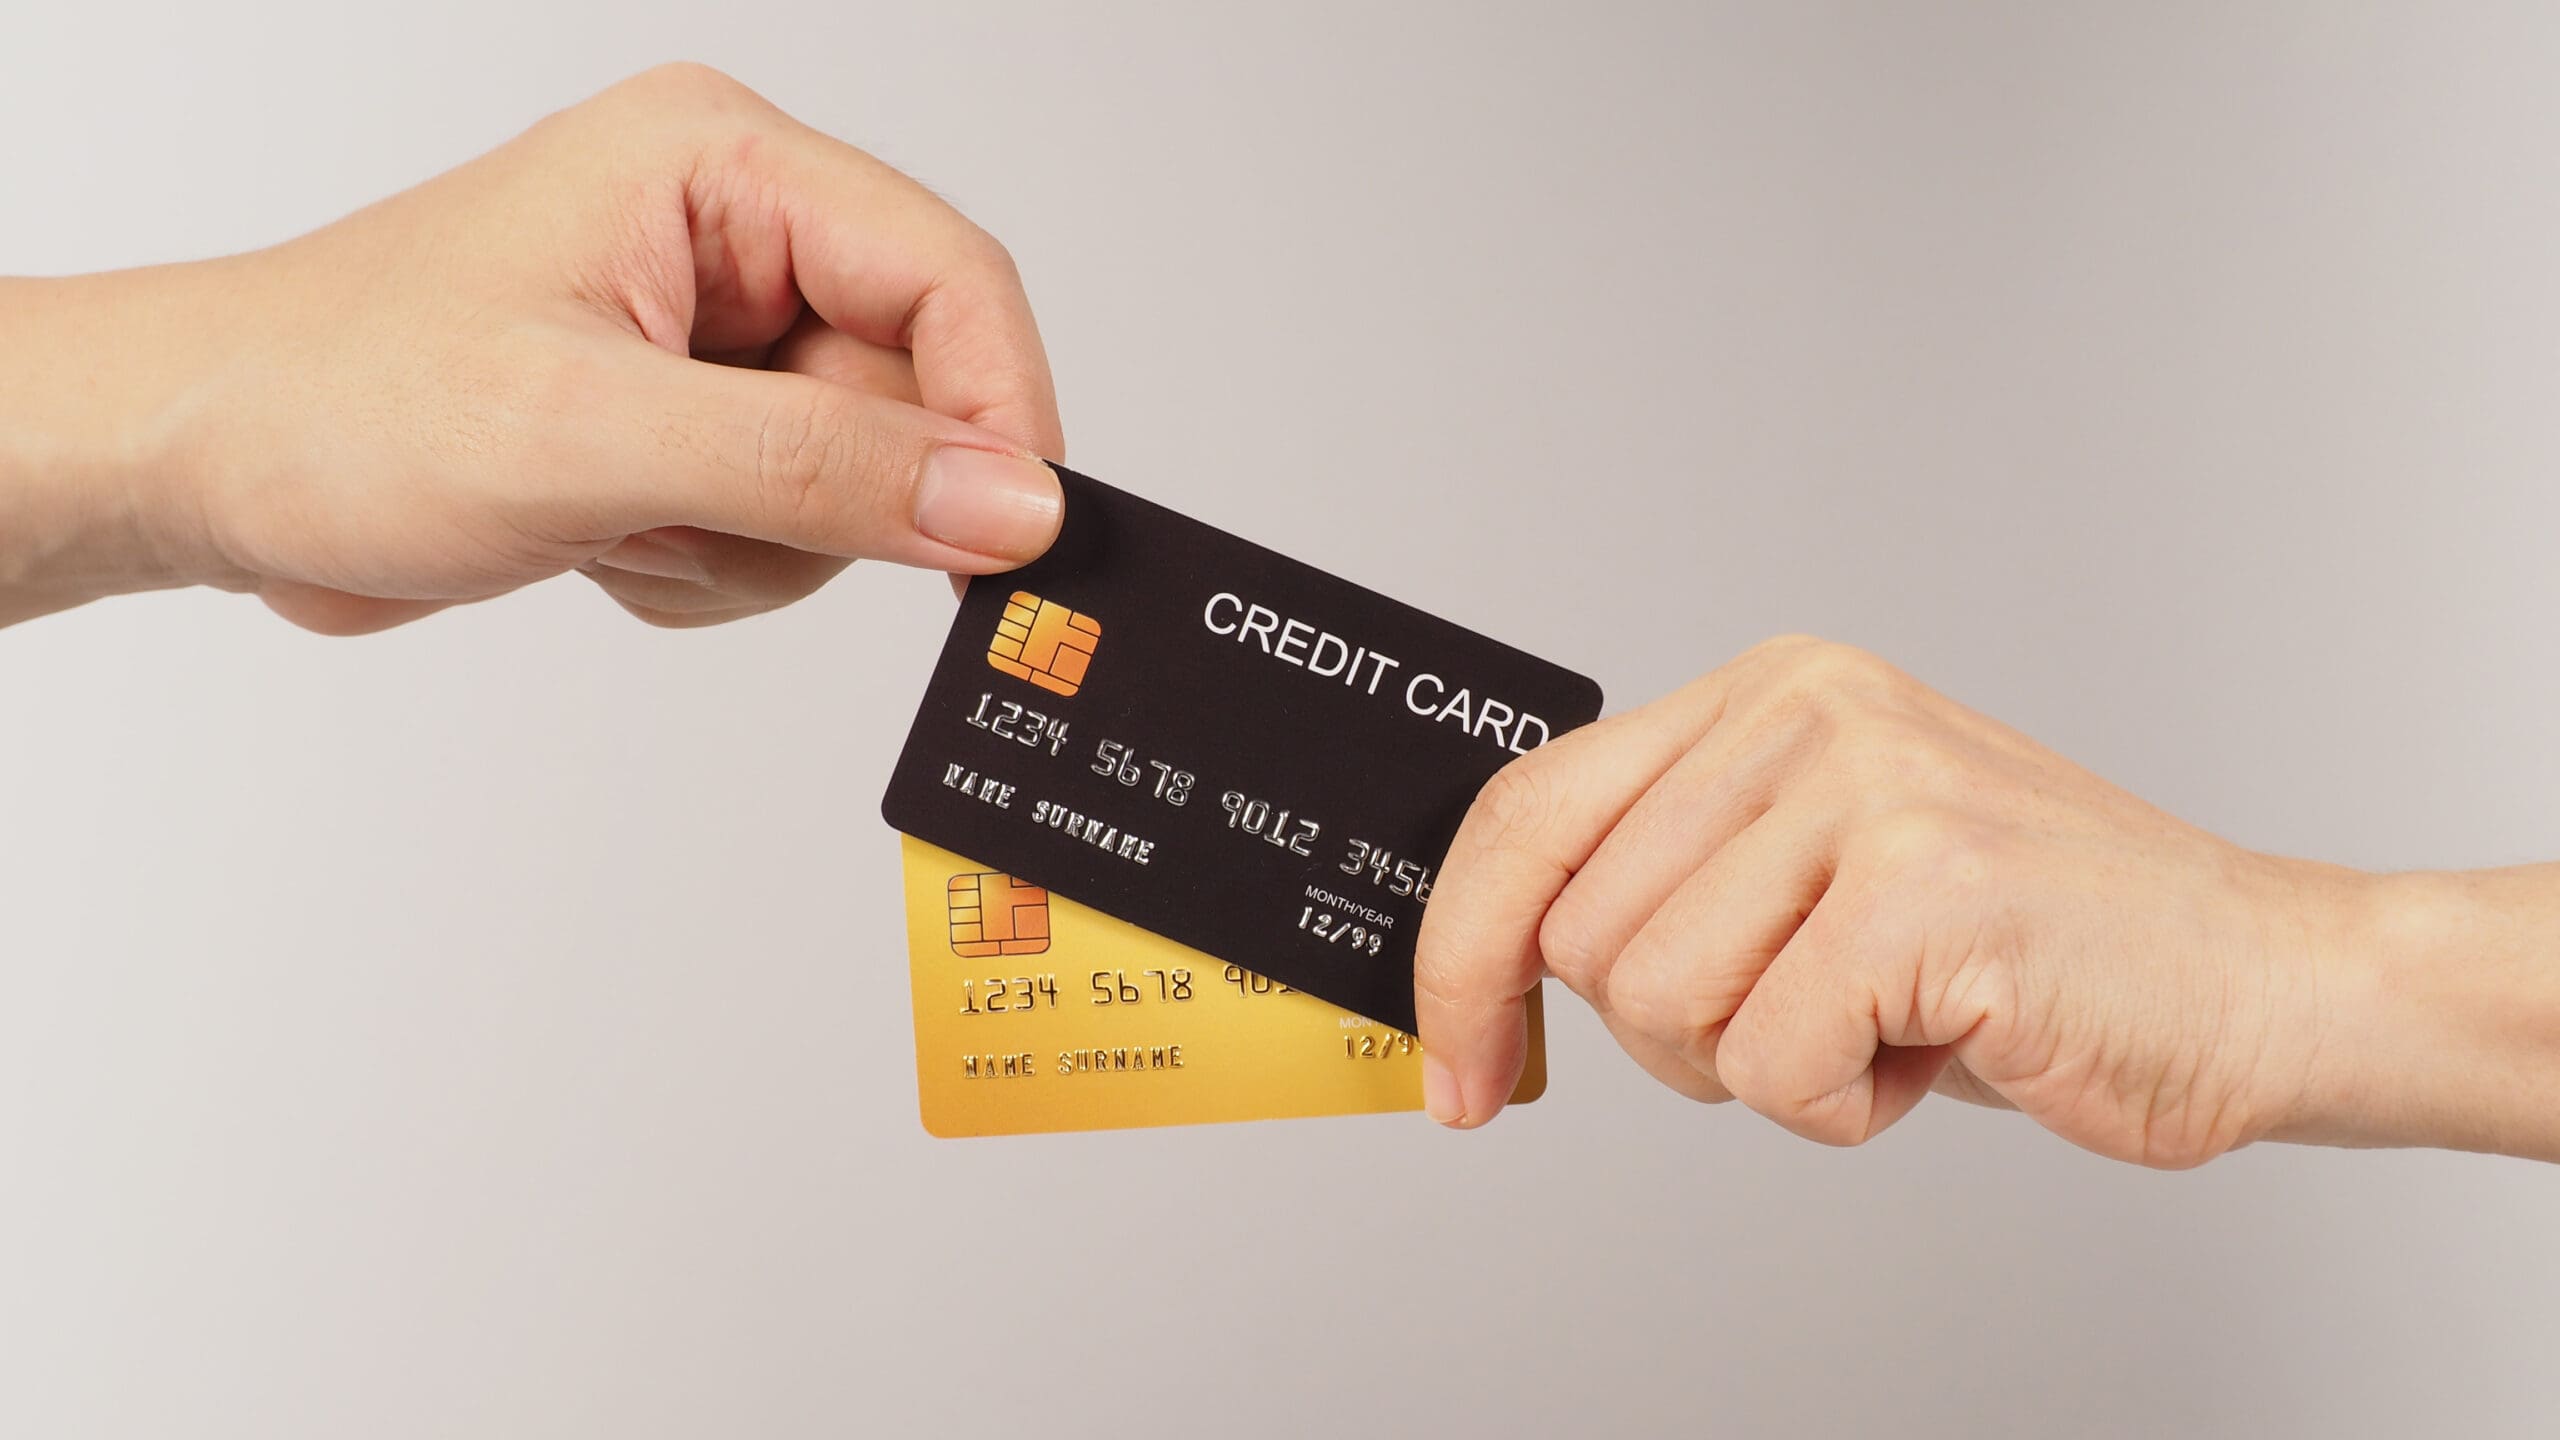 Hands are sent and receive black and gold credit cards on white background.